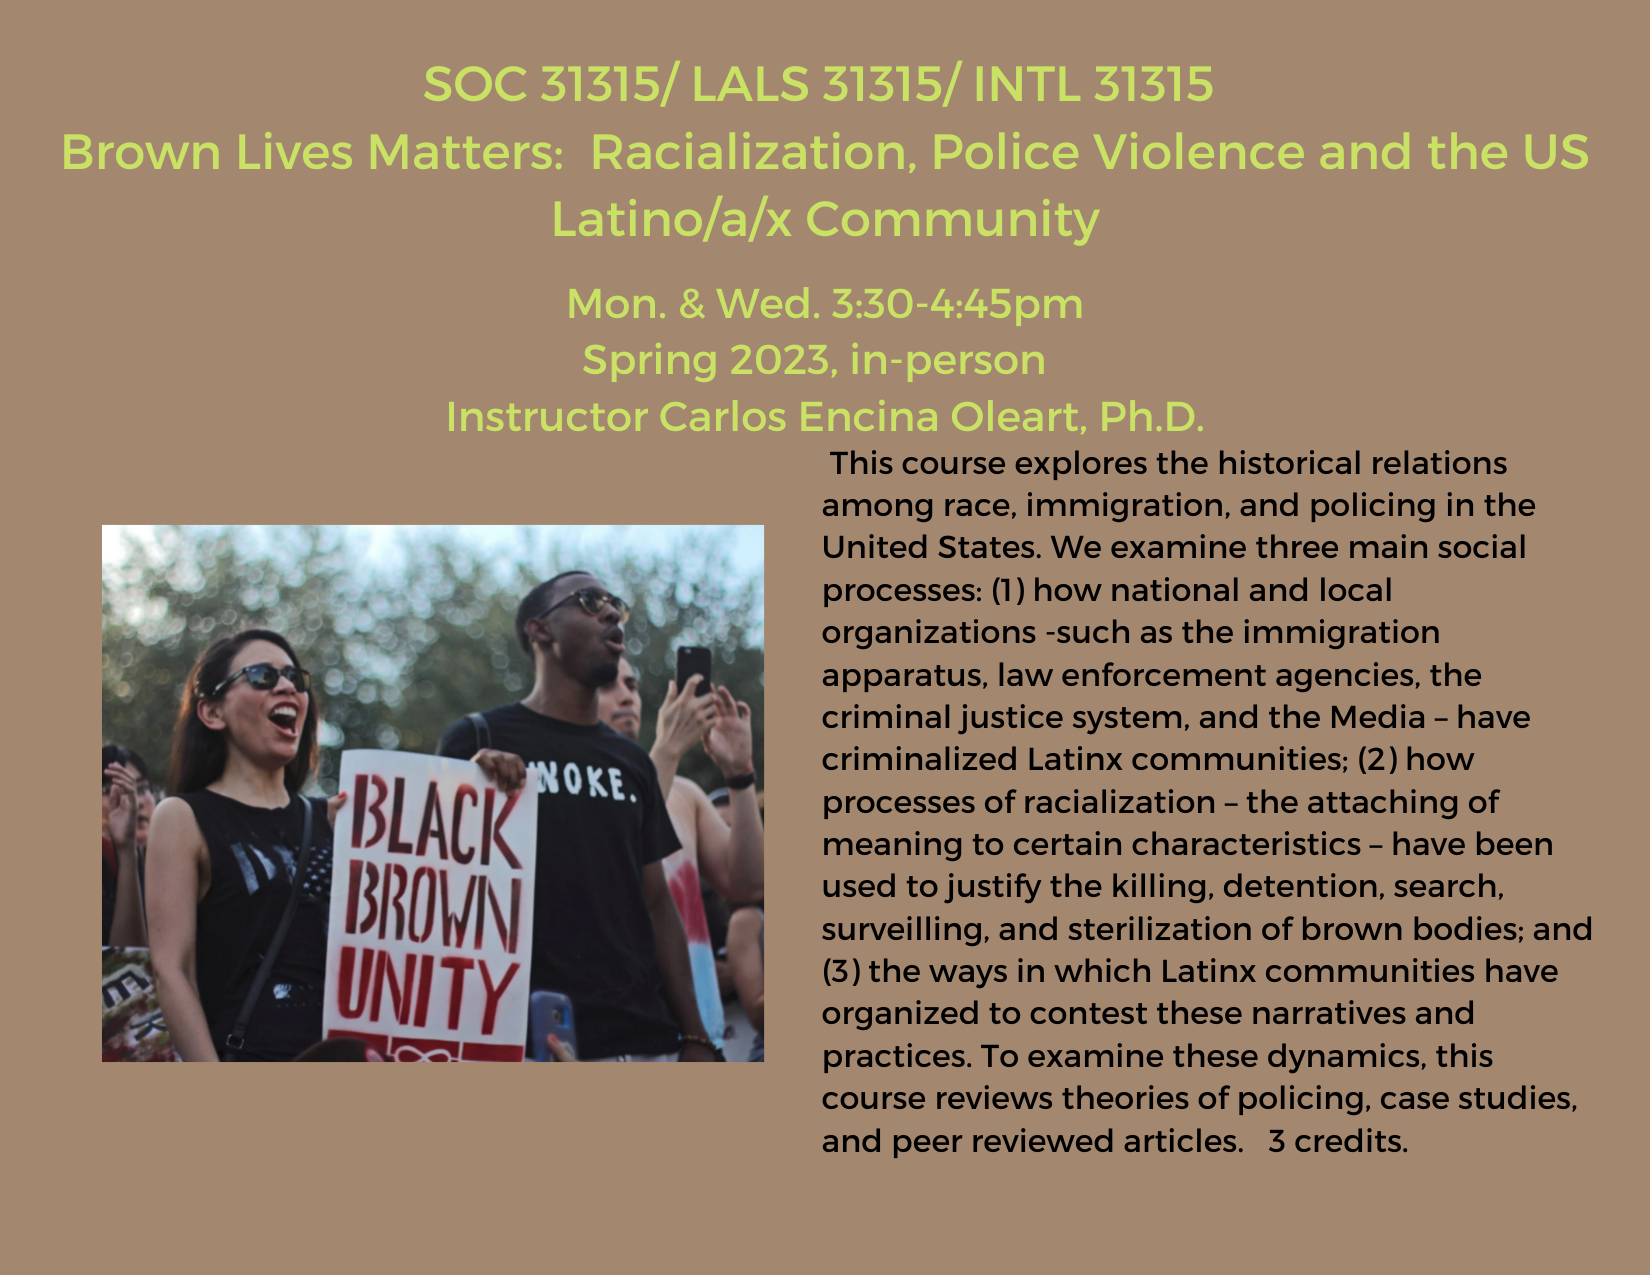 ColinPowellSchool CCNY Sociology SOC 31315 Brown Lives Matter Spring 2023 Course